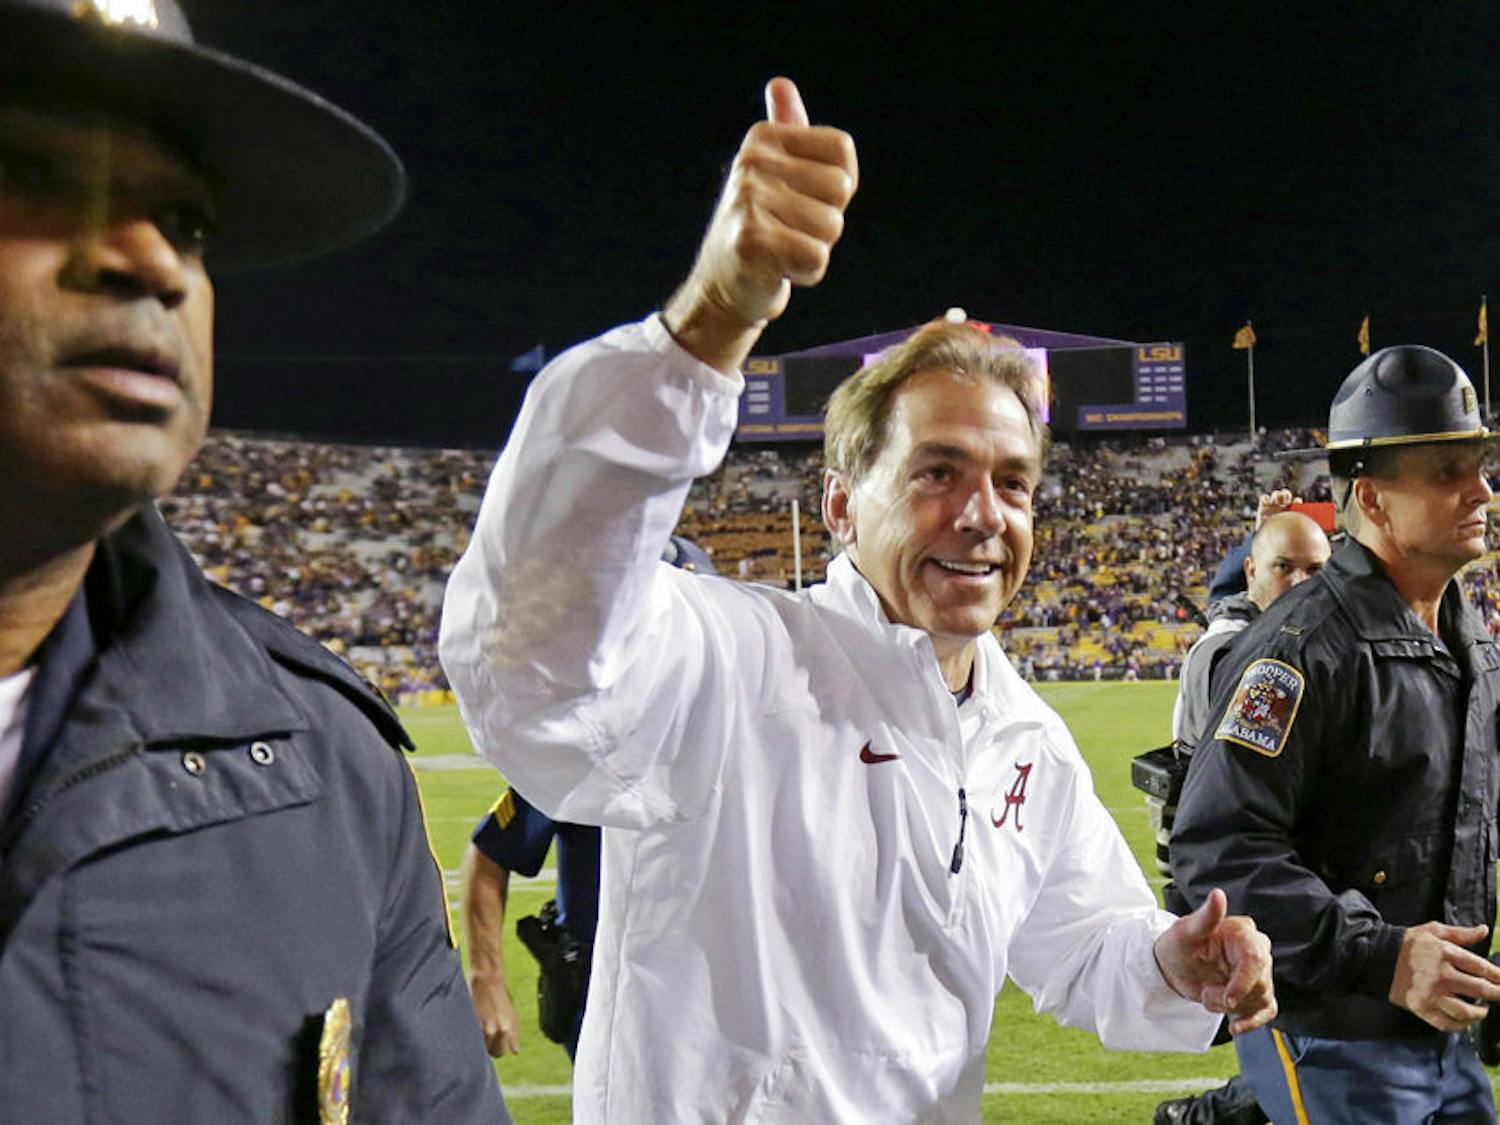 Alabama coach Nick Saban acknowledges fans as he runs off the field after Alabama's 20-13 overtime win over LSU in Baton Rouge, Louisiana on Nov. 9.